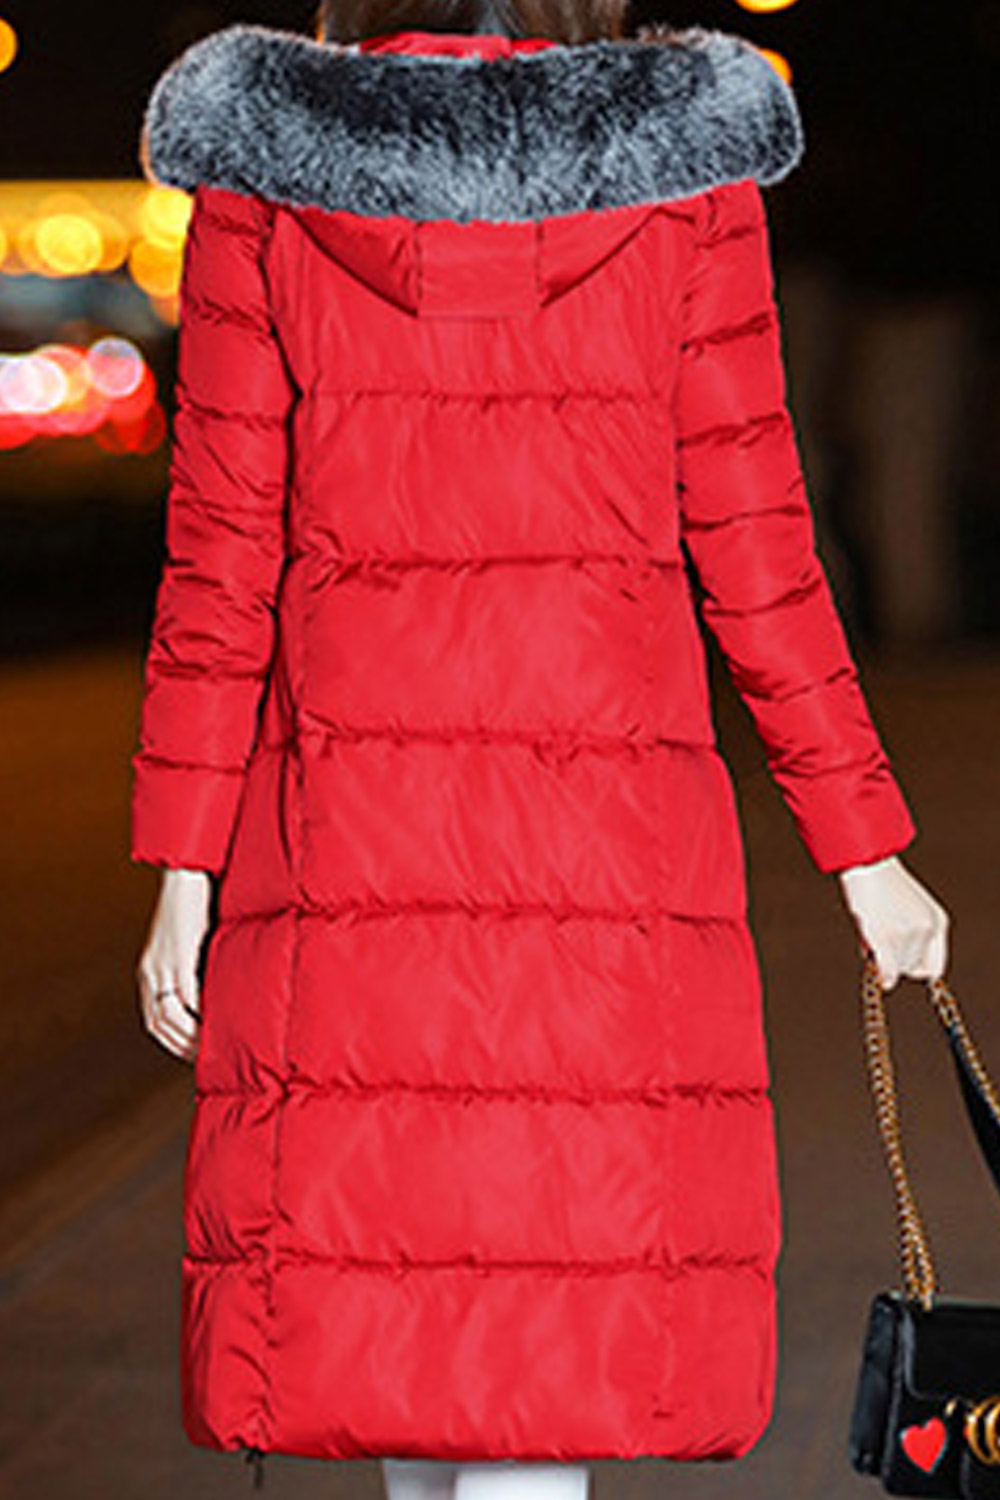 Selected Color is Red Back fur collar